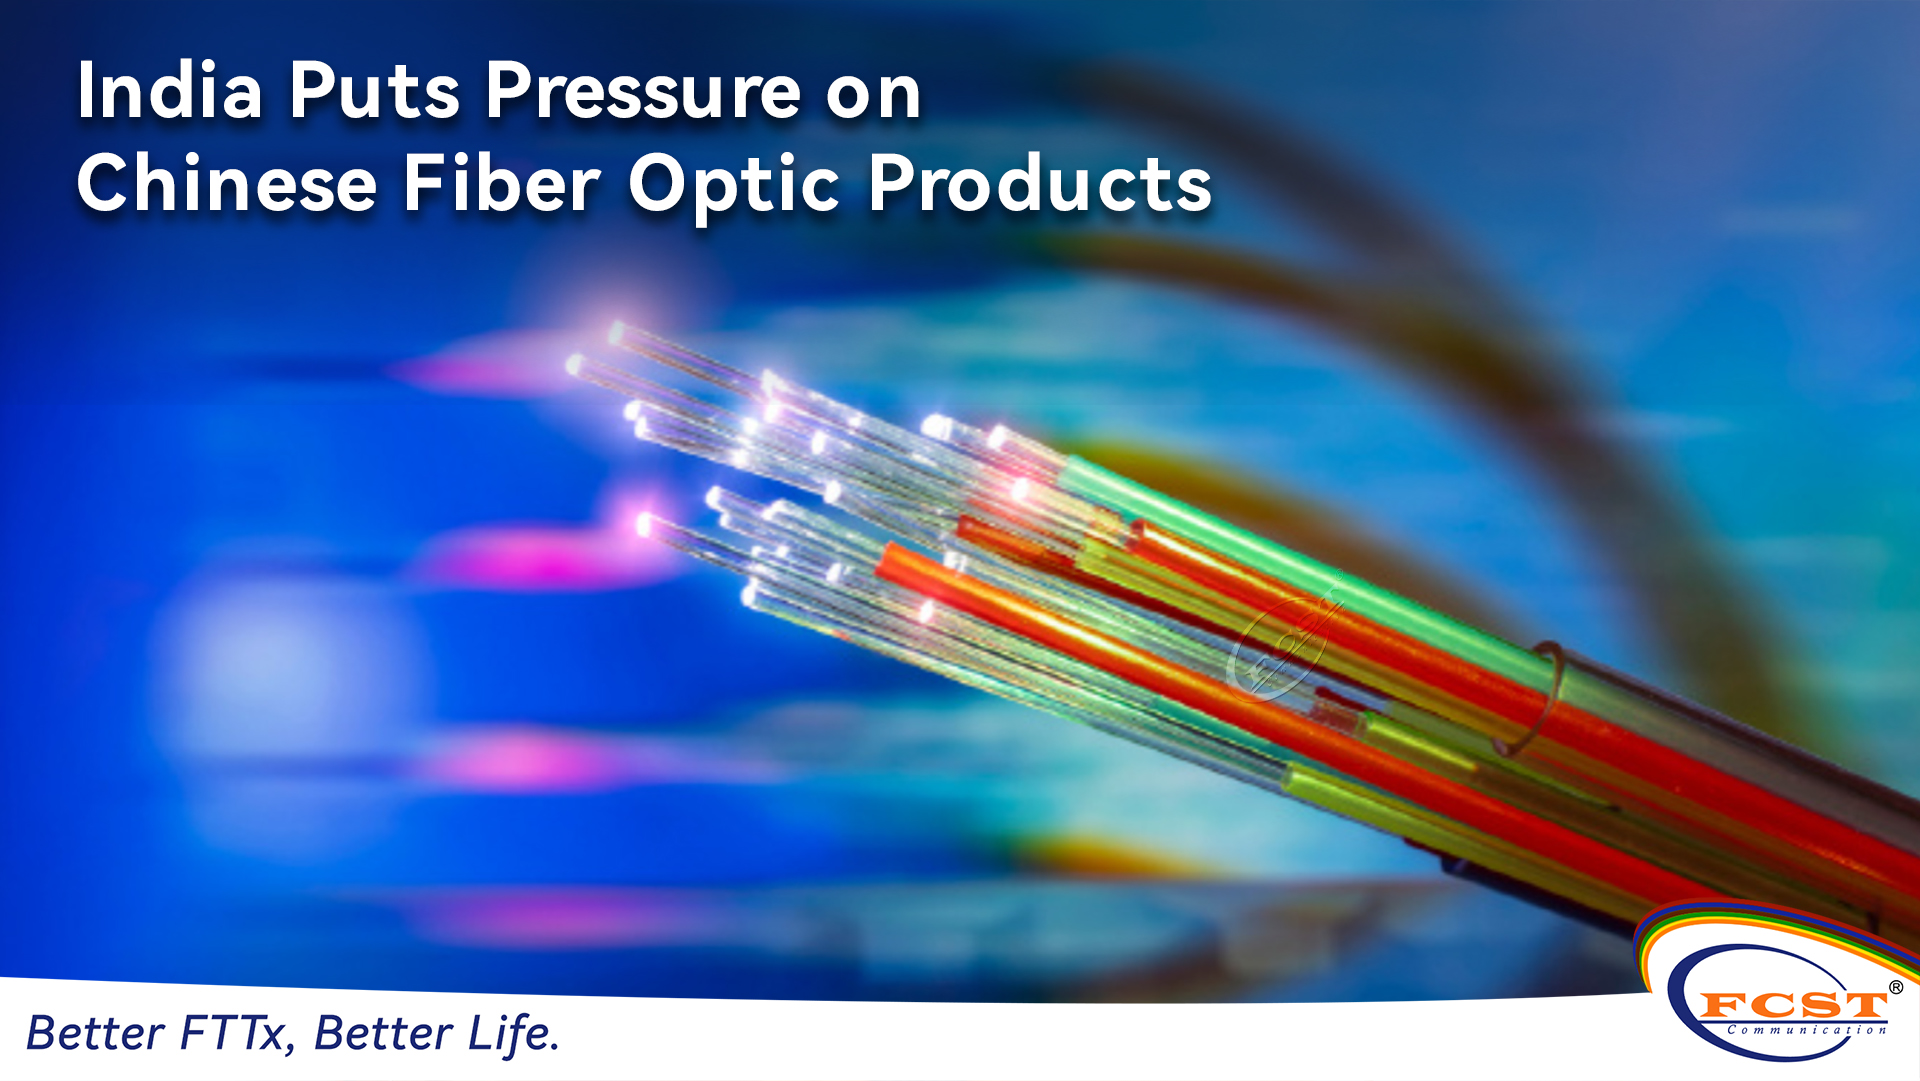 India Puts Pressure on Chinese Fiber Optic Products